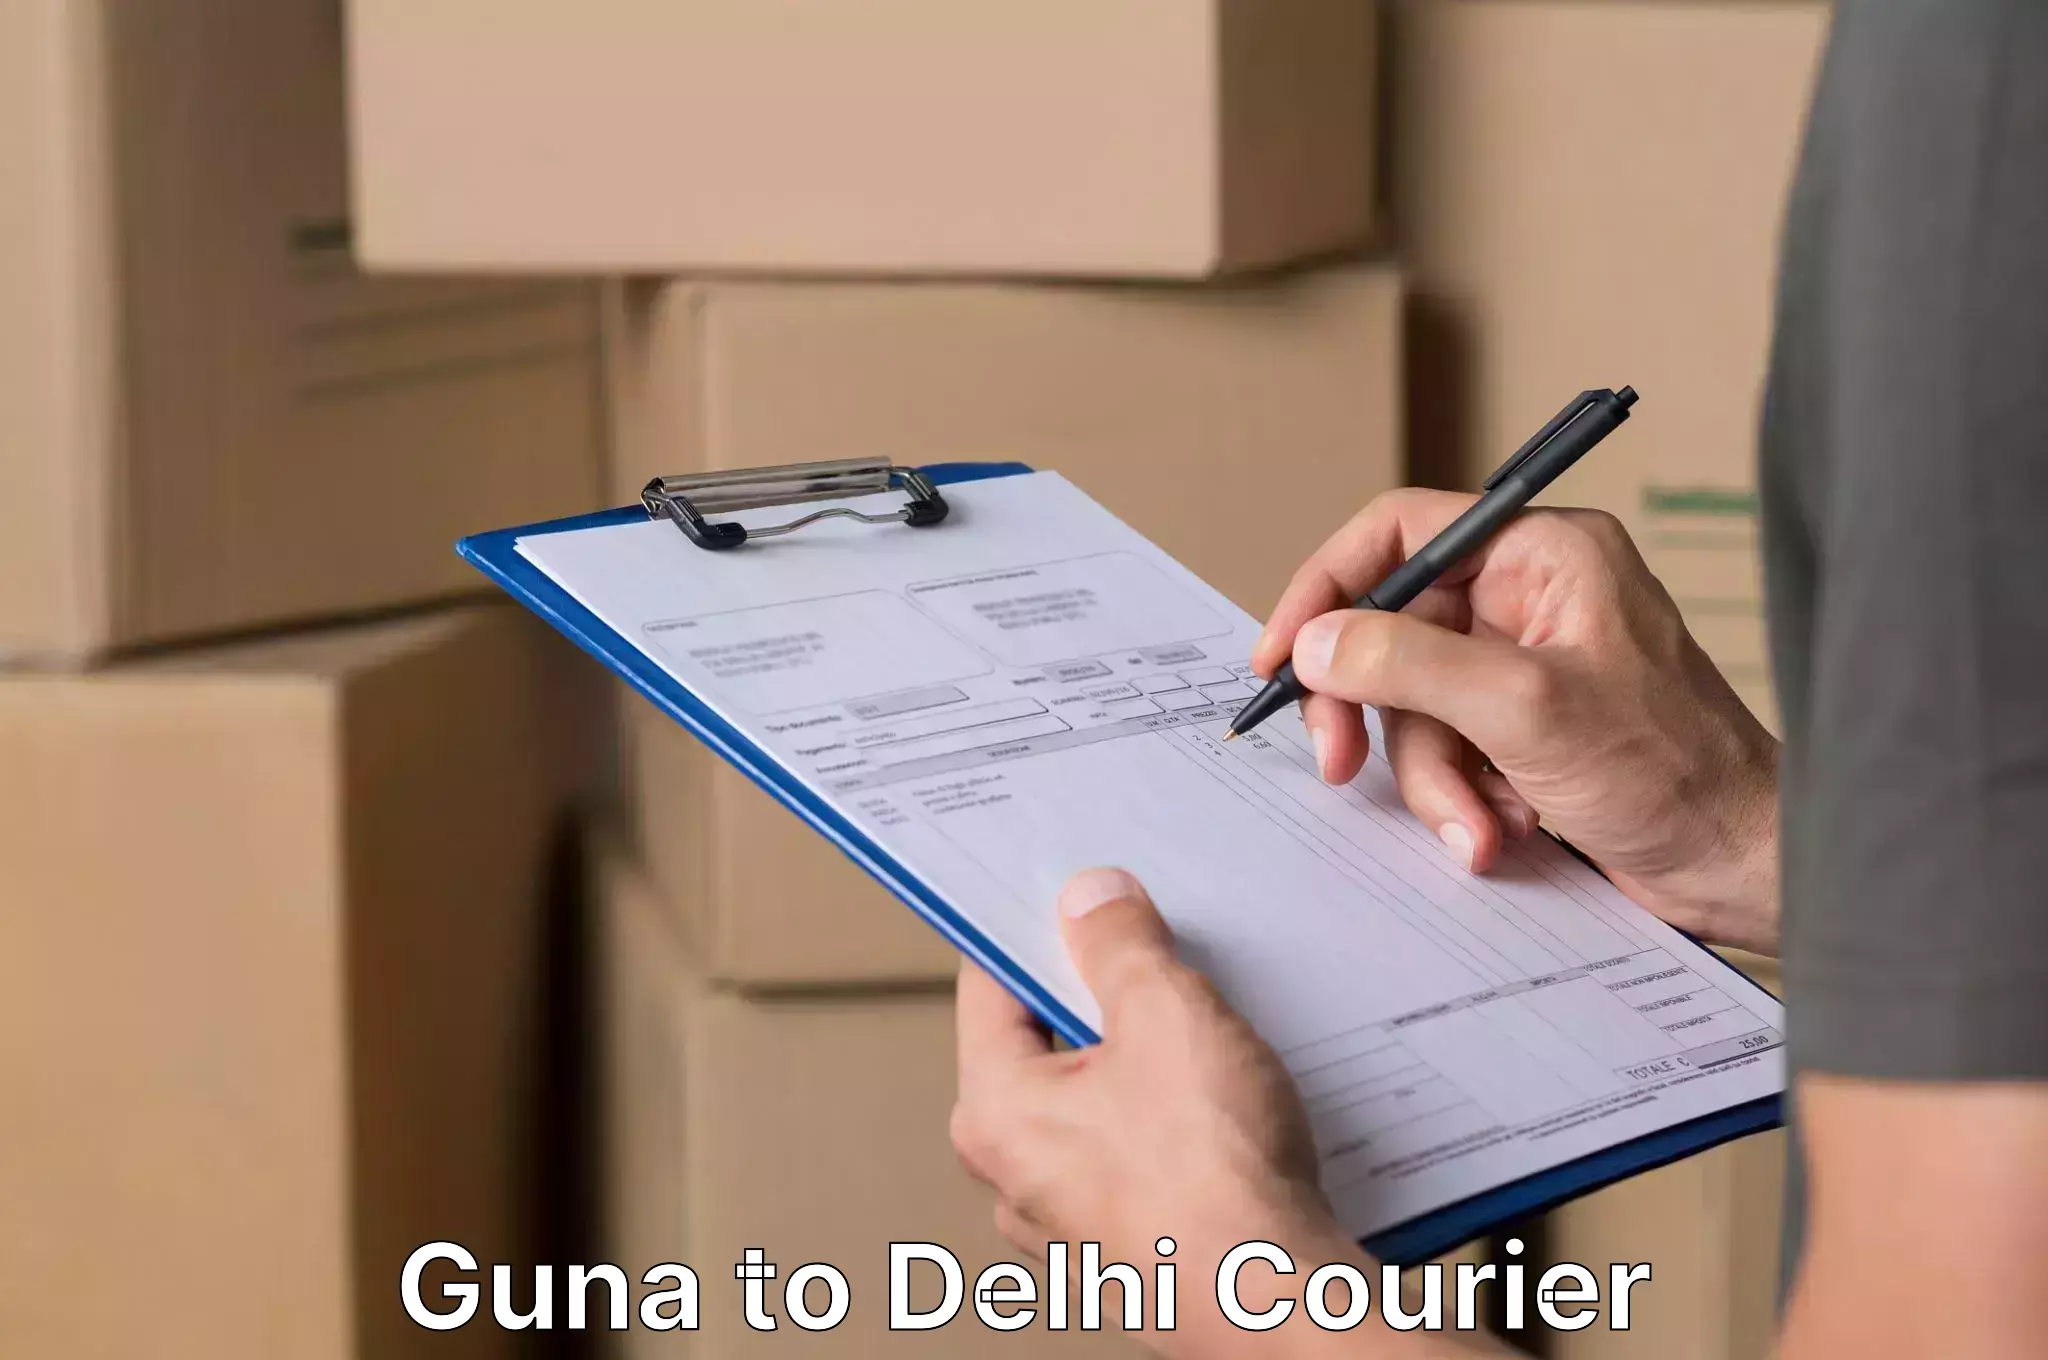 Hassle-free relocation Guna to NCR